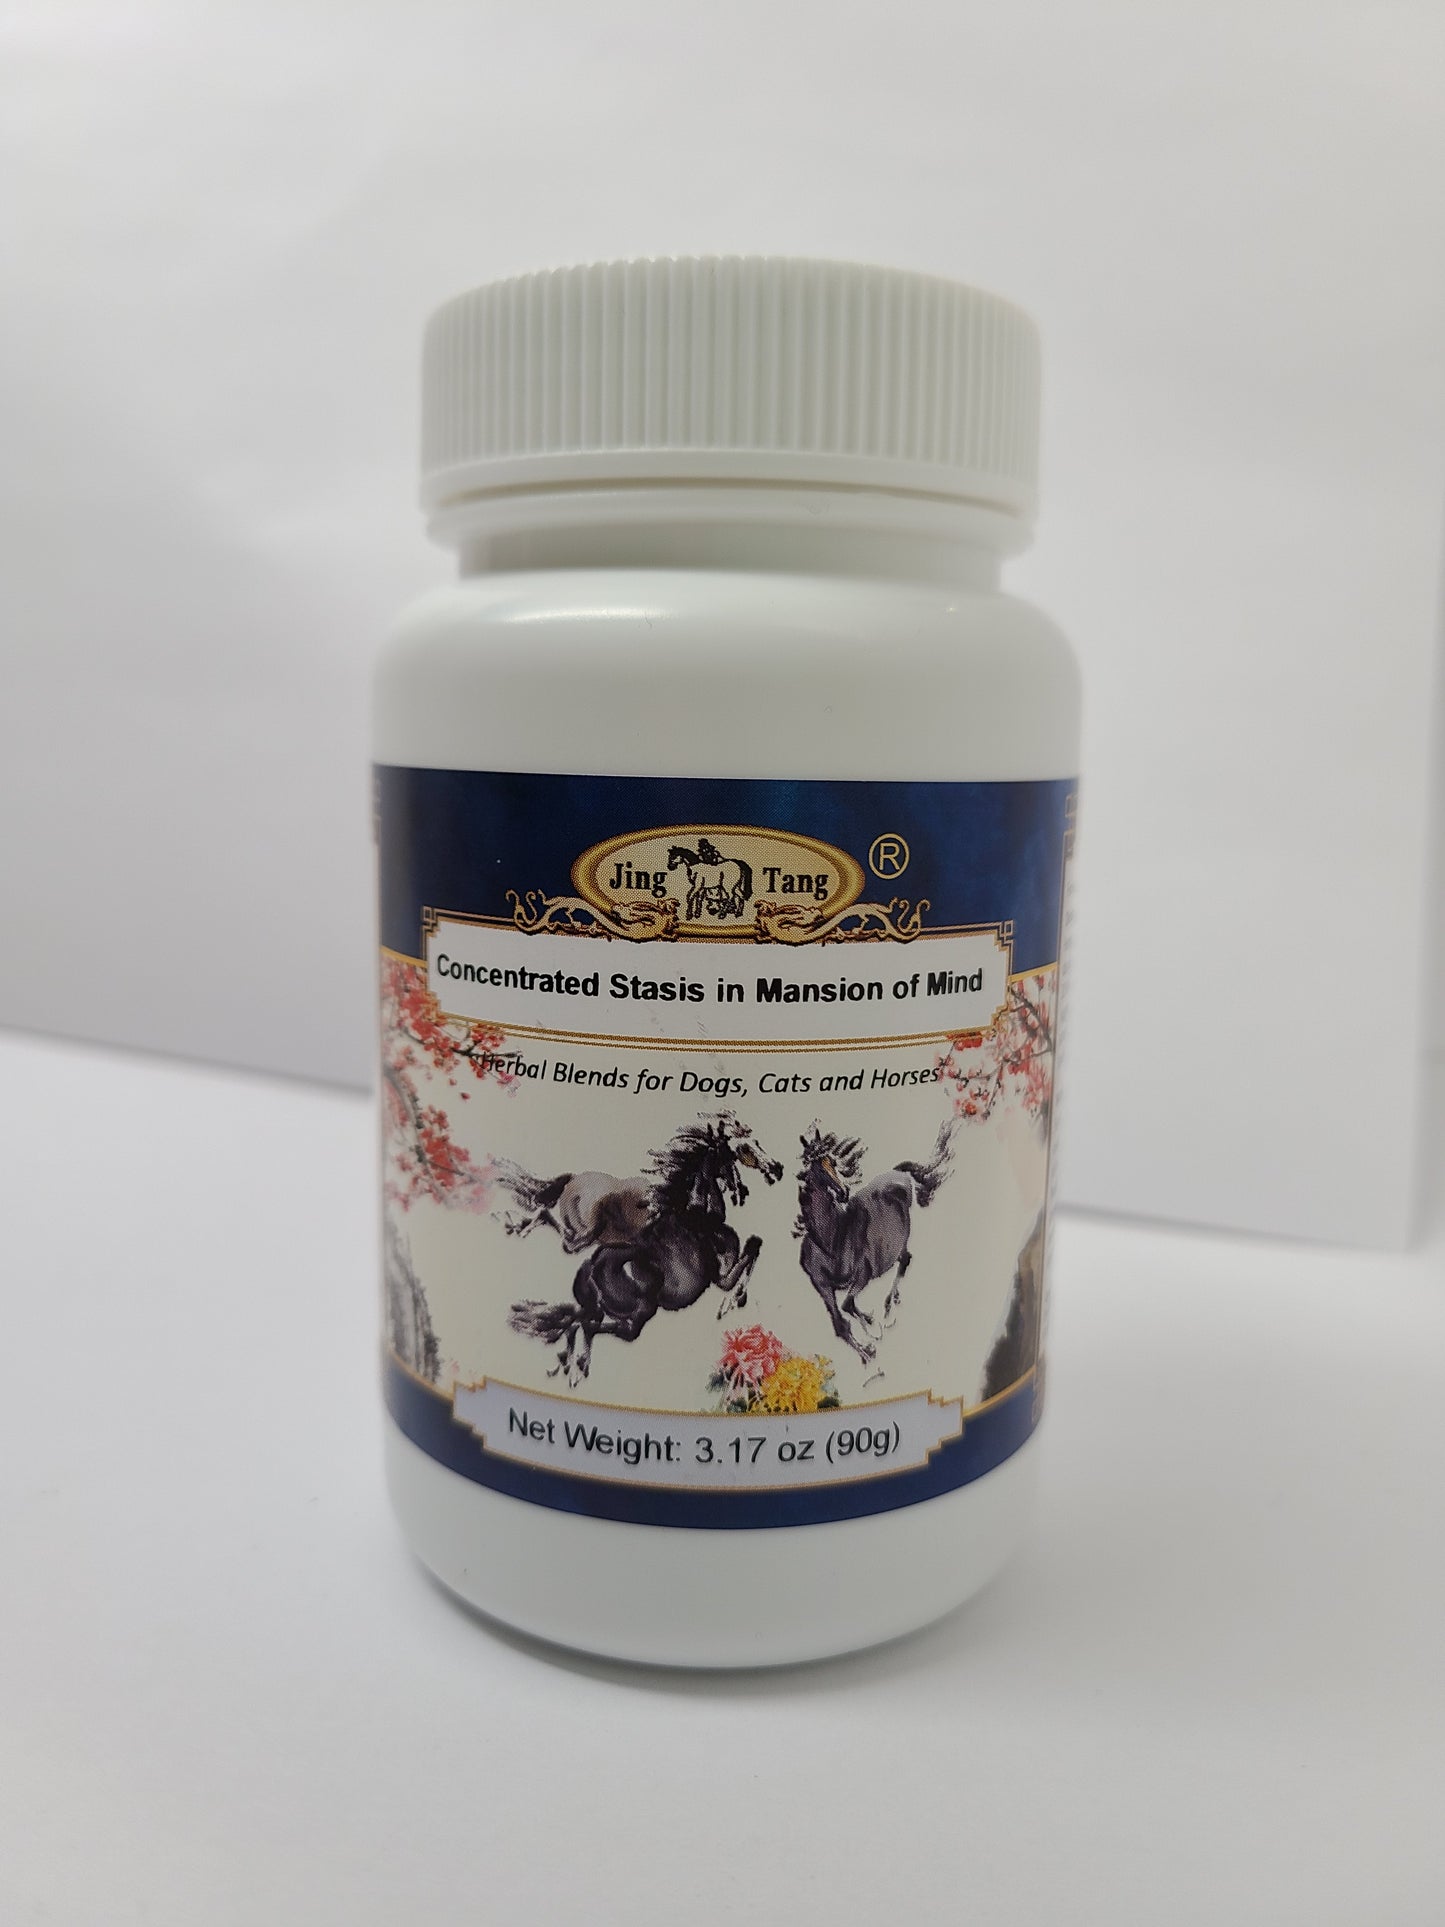 Jing Tang Herbals: Concentrated Stasis in Mansion of Mind 90g powder (1 bottle)